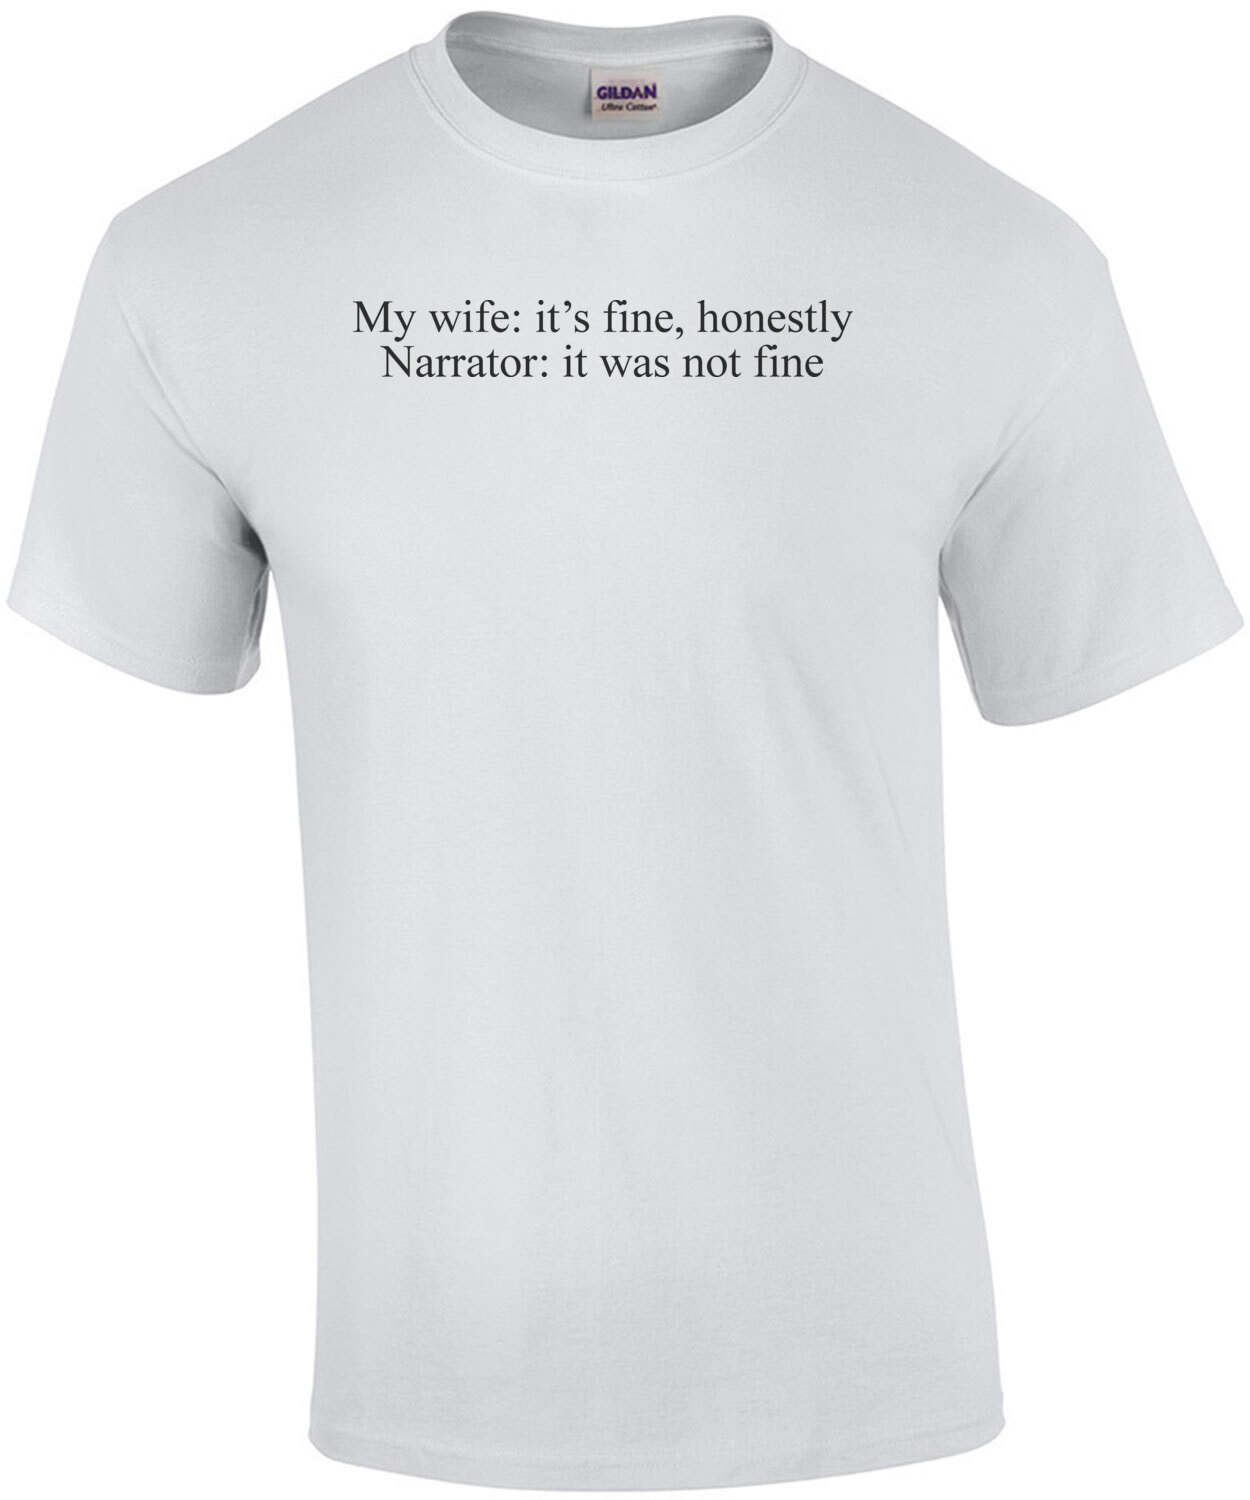 My wife: it's fine, honestly - Narrator: it was not fine - funny sarcastic marriage relationship t-shirt